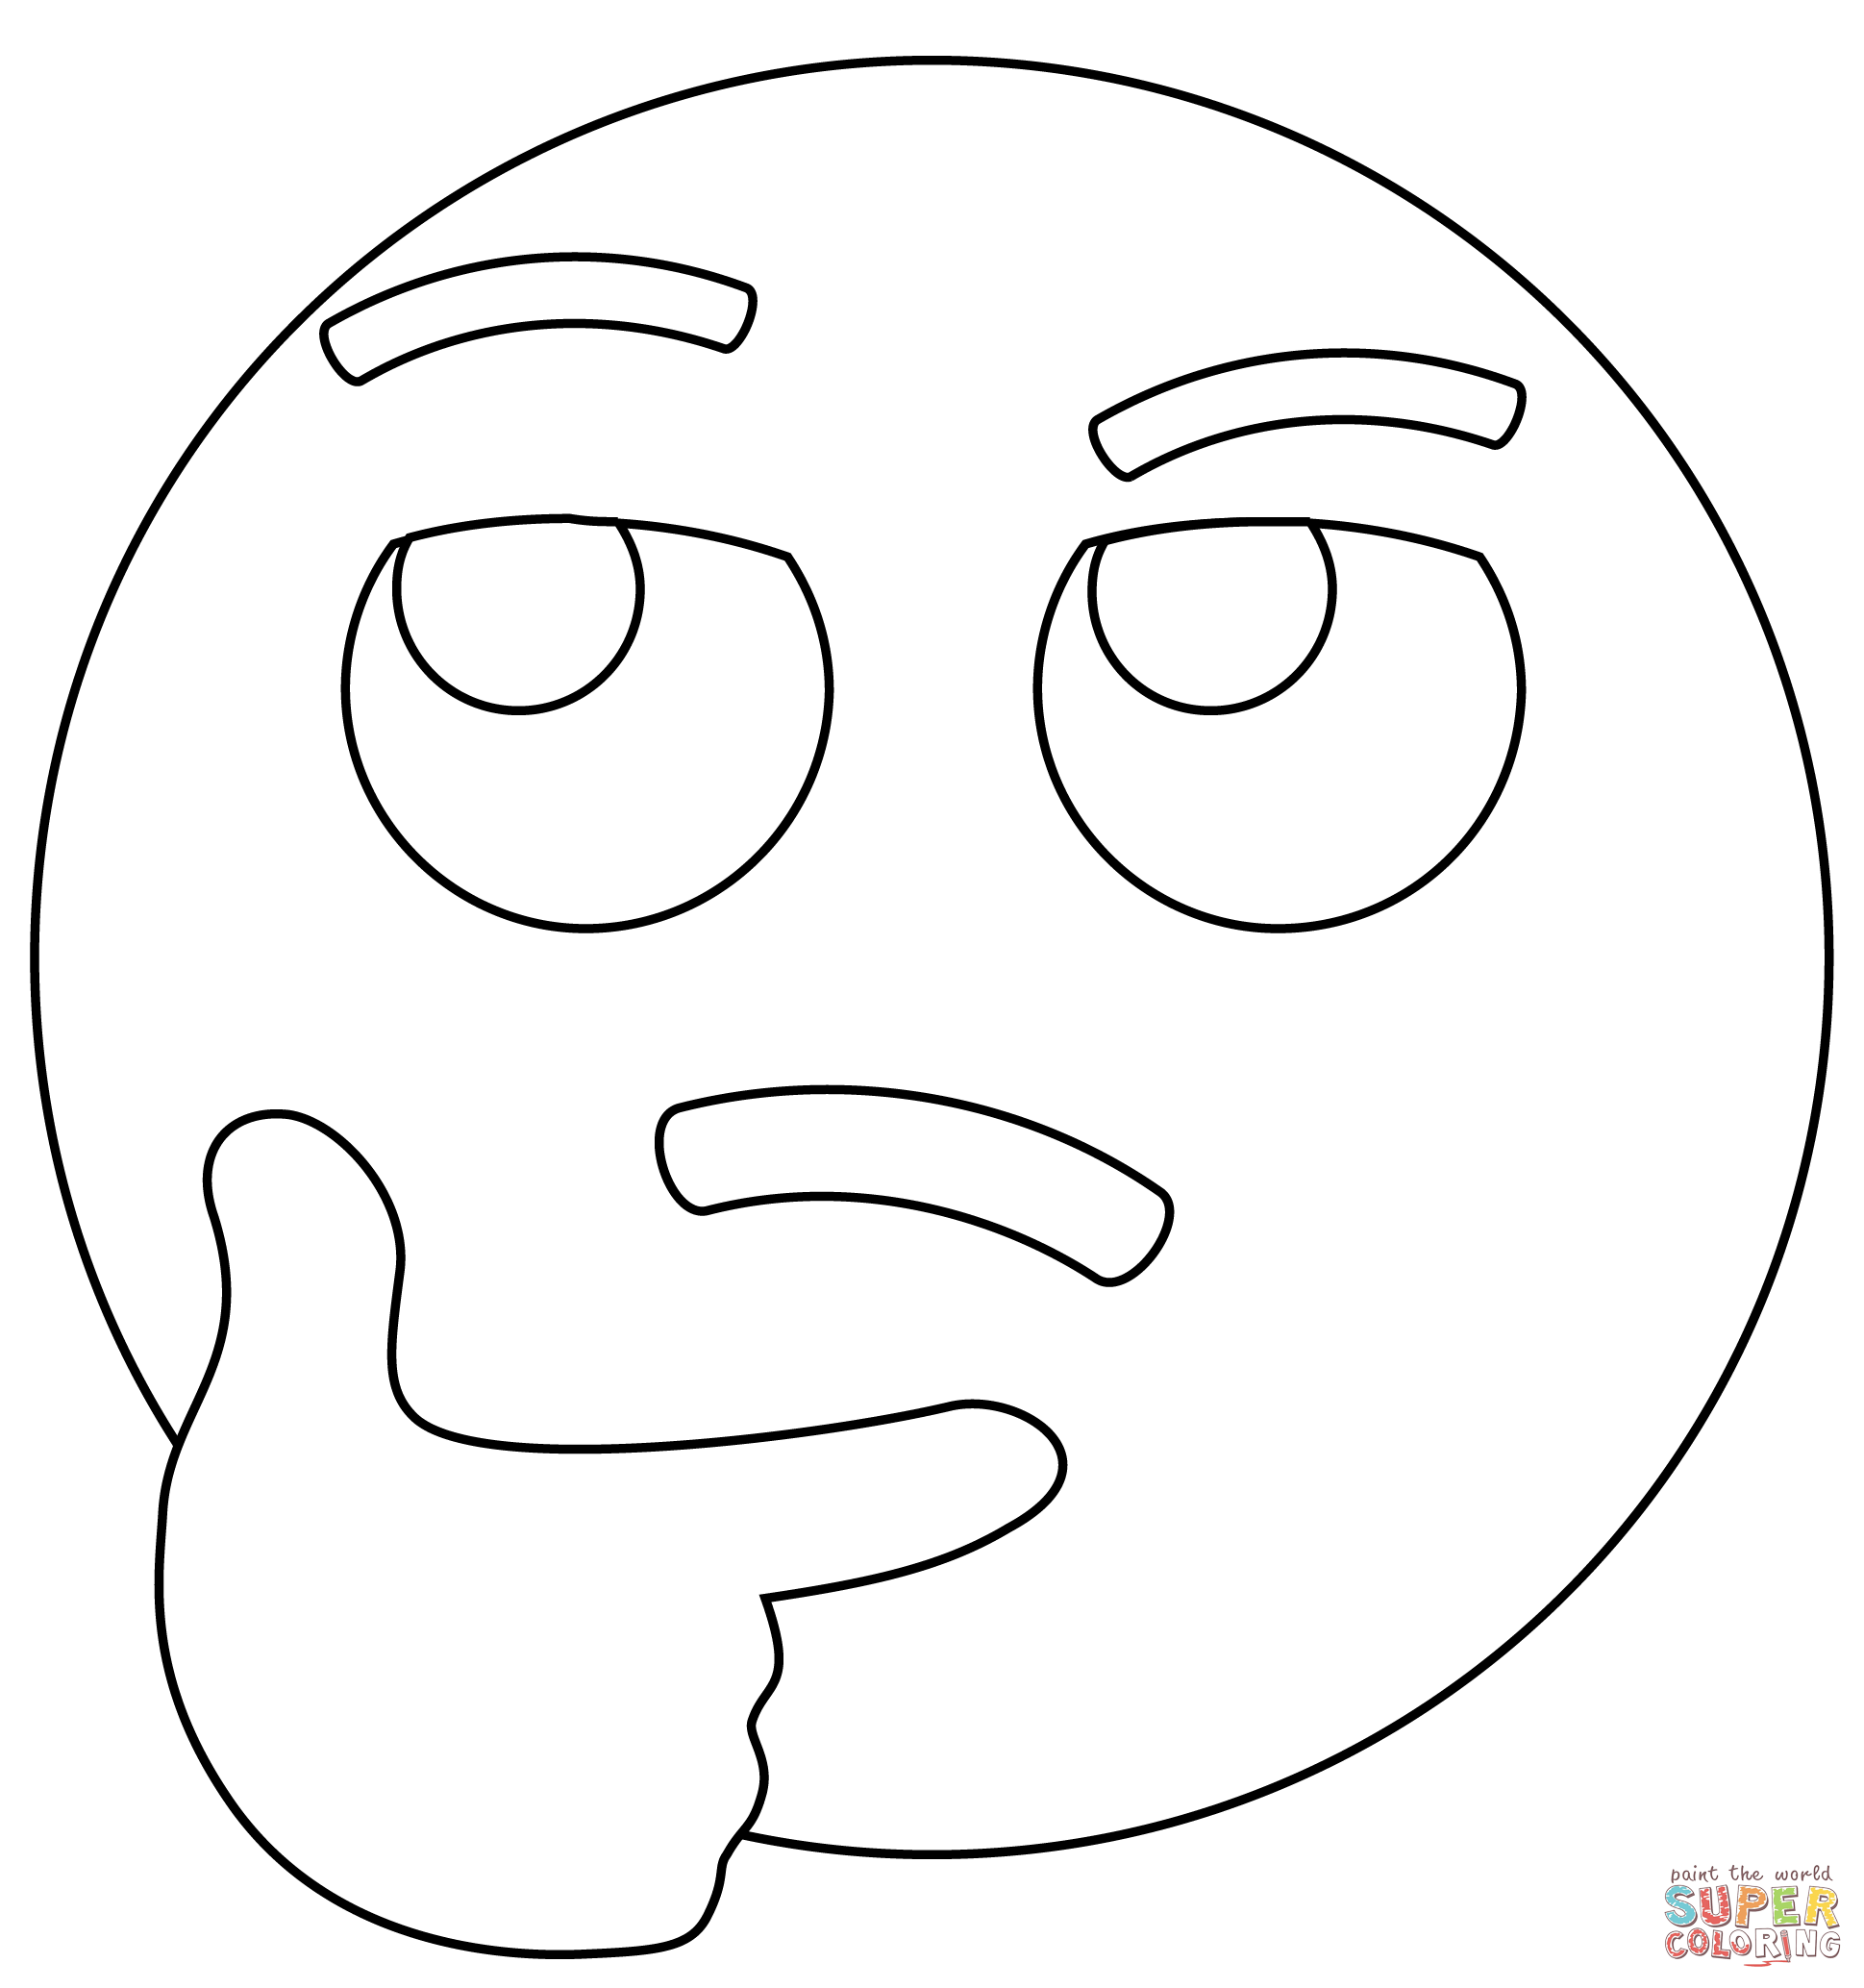 Thinking face coloring page free printable coloring pages